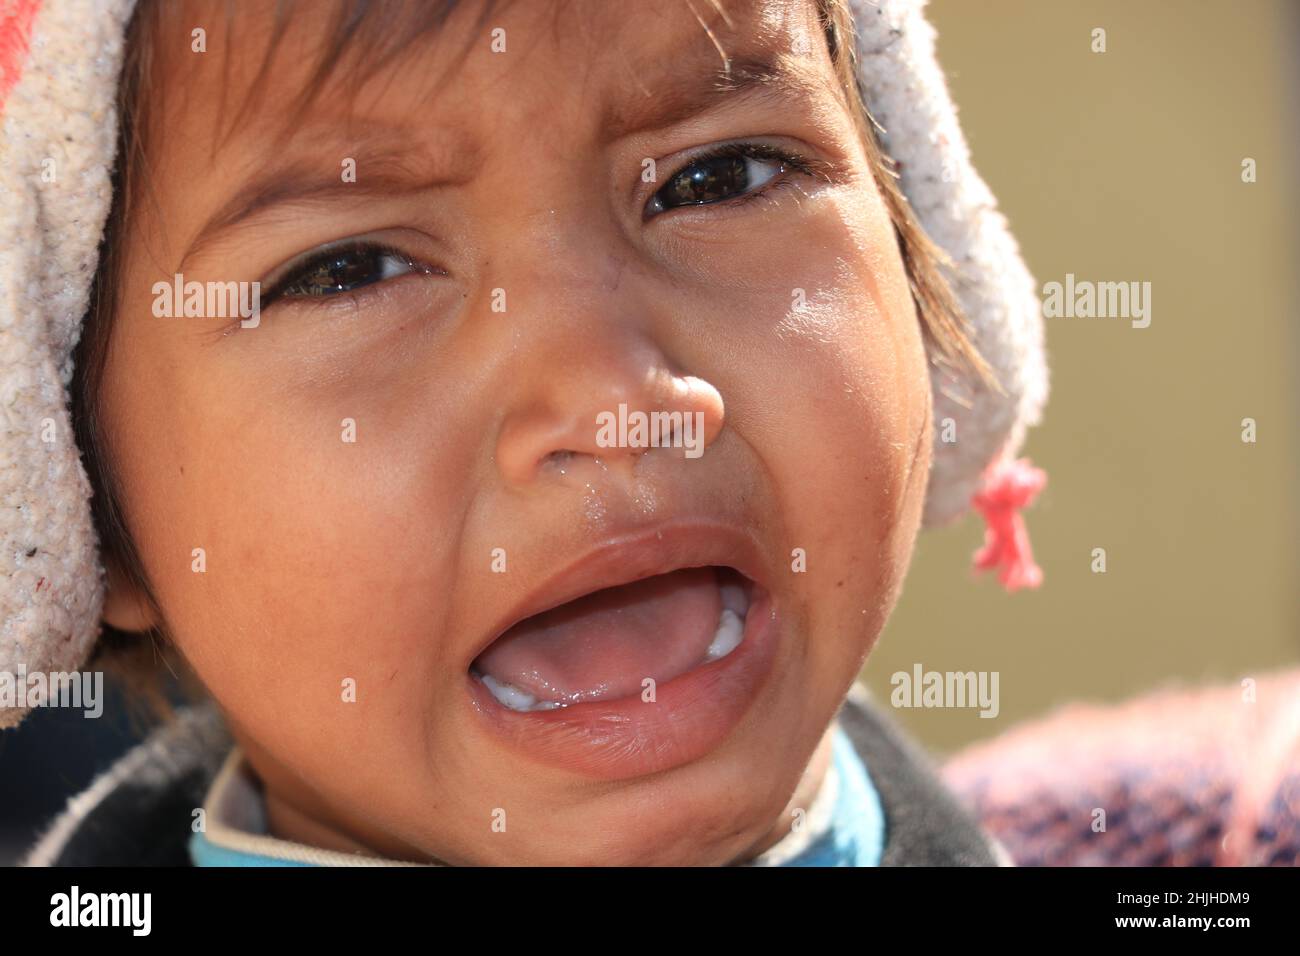 little boy crying,portrait of unhappy. Stock Photo